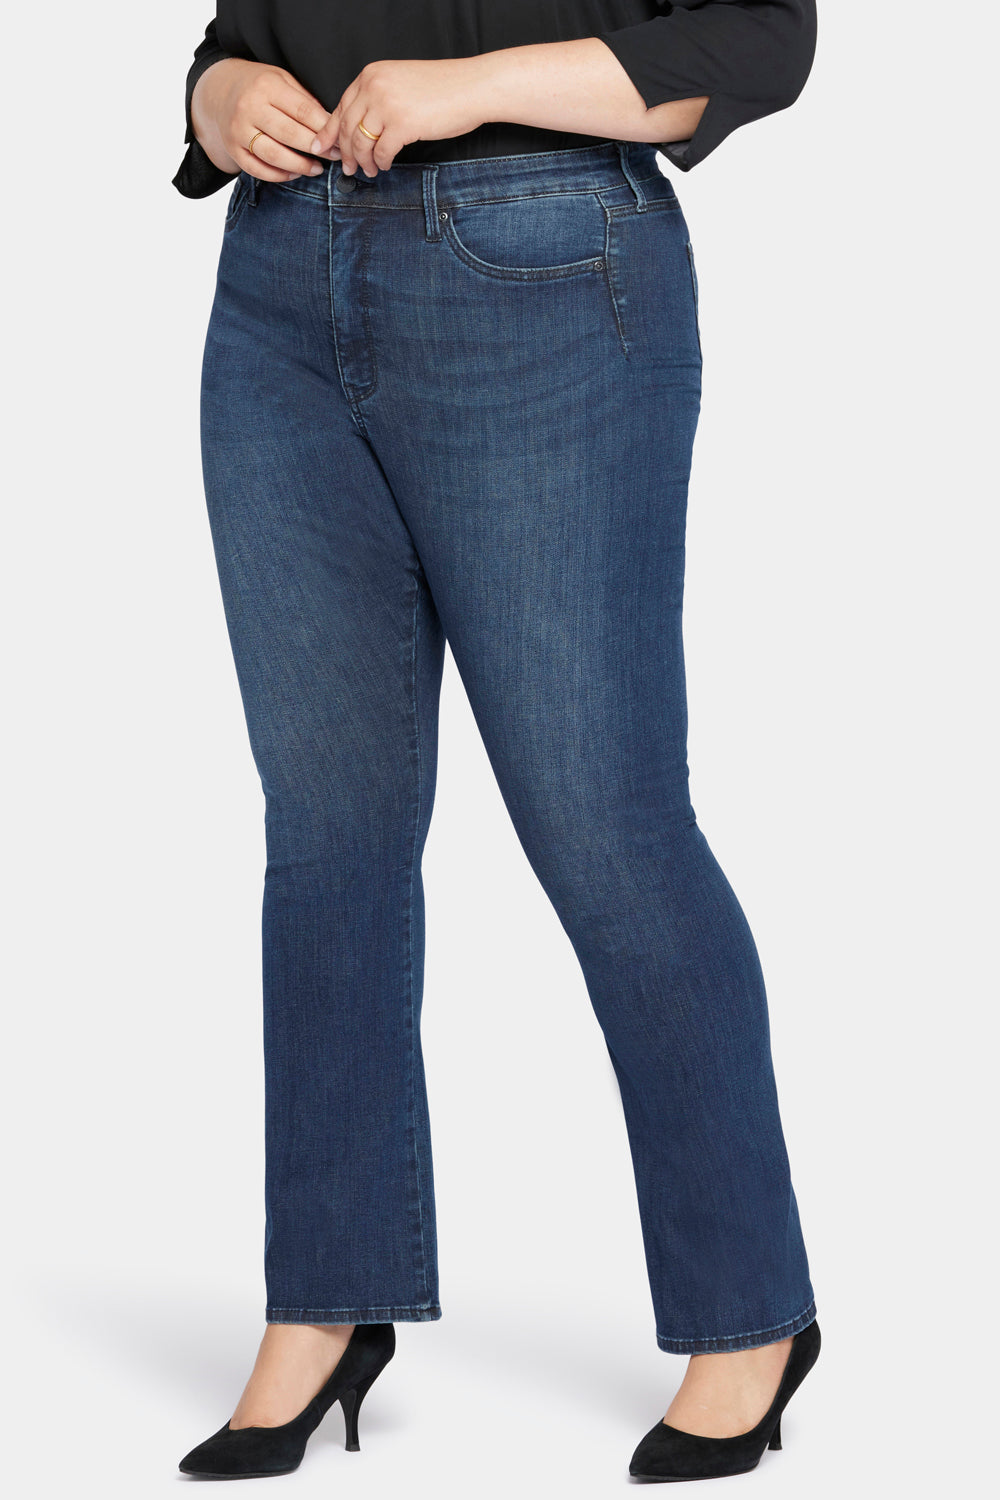 Le Silhouette Slim Bootcut Jeans In Long Inseam Plus Size With High Rise -  Precious Blue